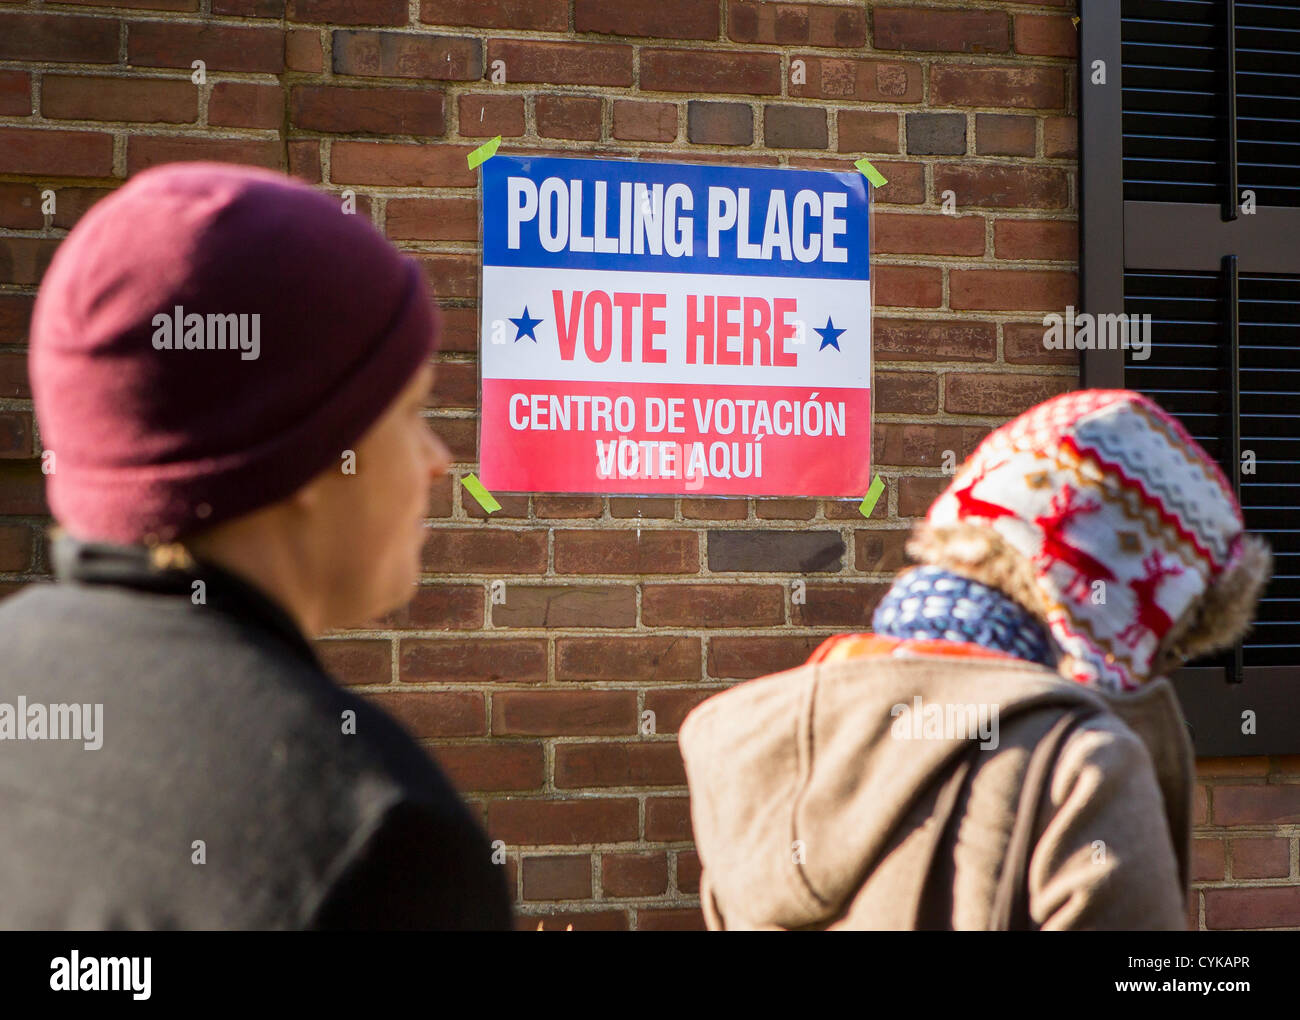 ARLINGTON, VIRGINIA, USA. 6th November, 2012. Voters line up to vote in 2012 Presidential election. Stock Photo